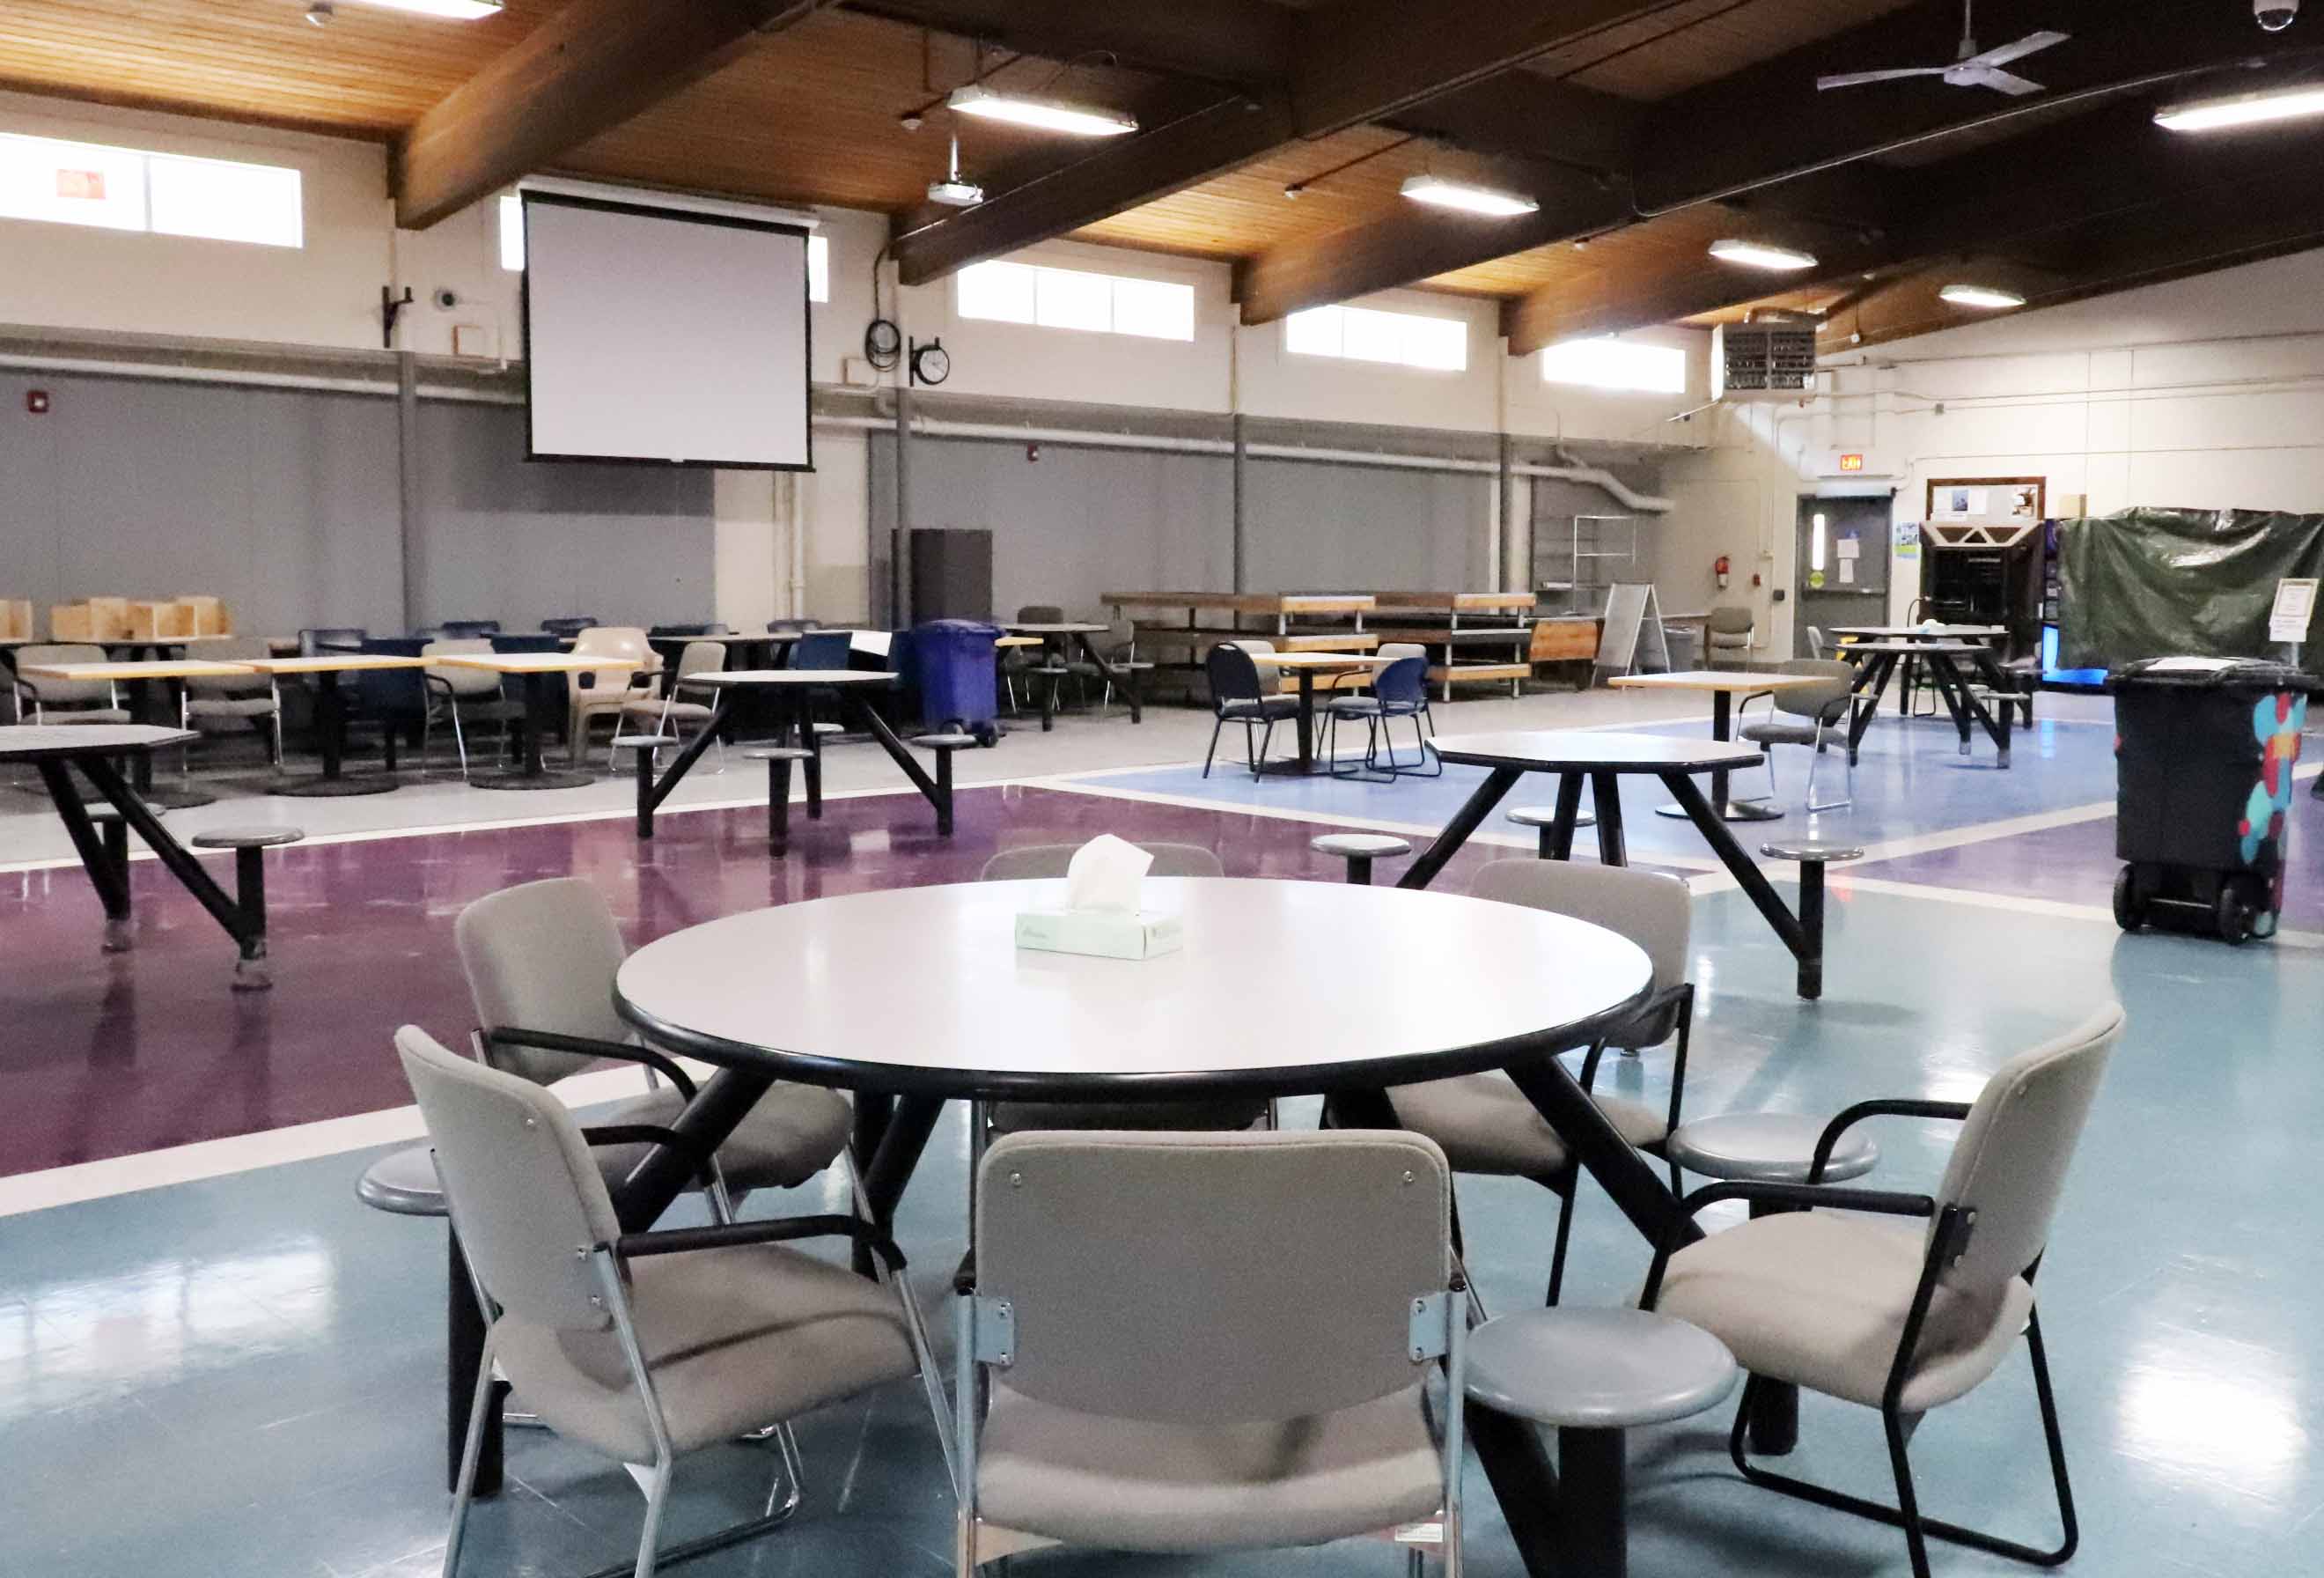 Large room with round tables spread around the room, each table with several chairs around it